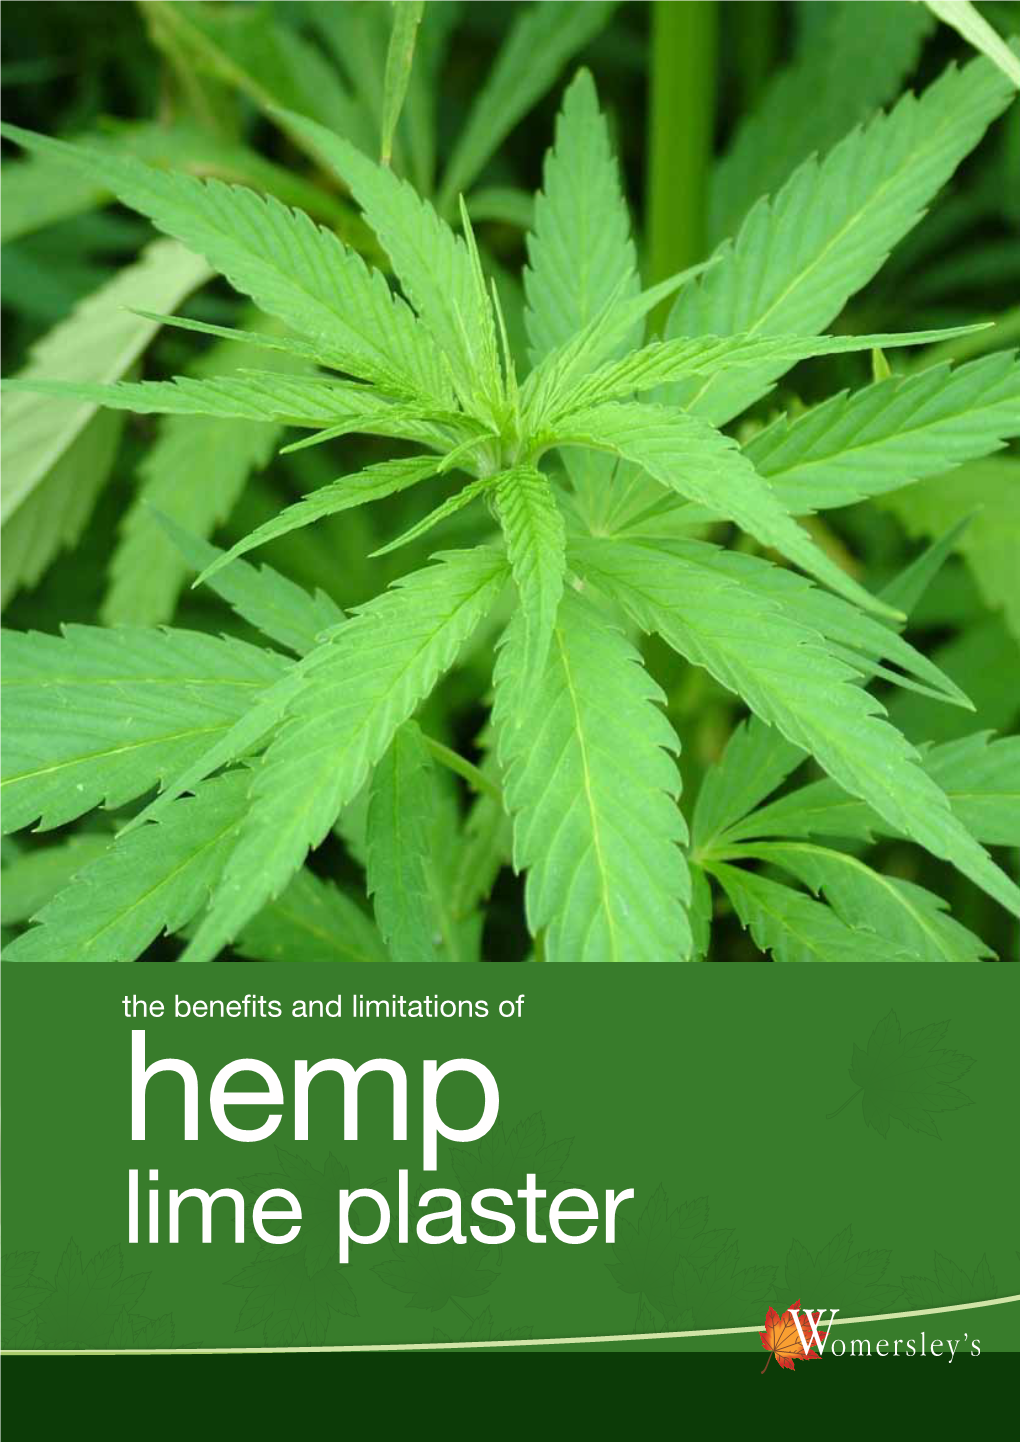 Lime Plaster an Introduction to Hemp